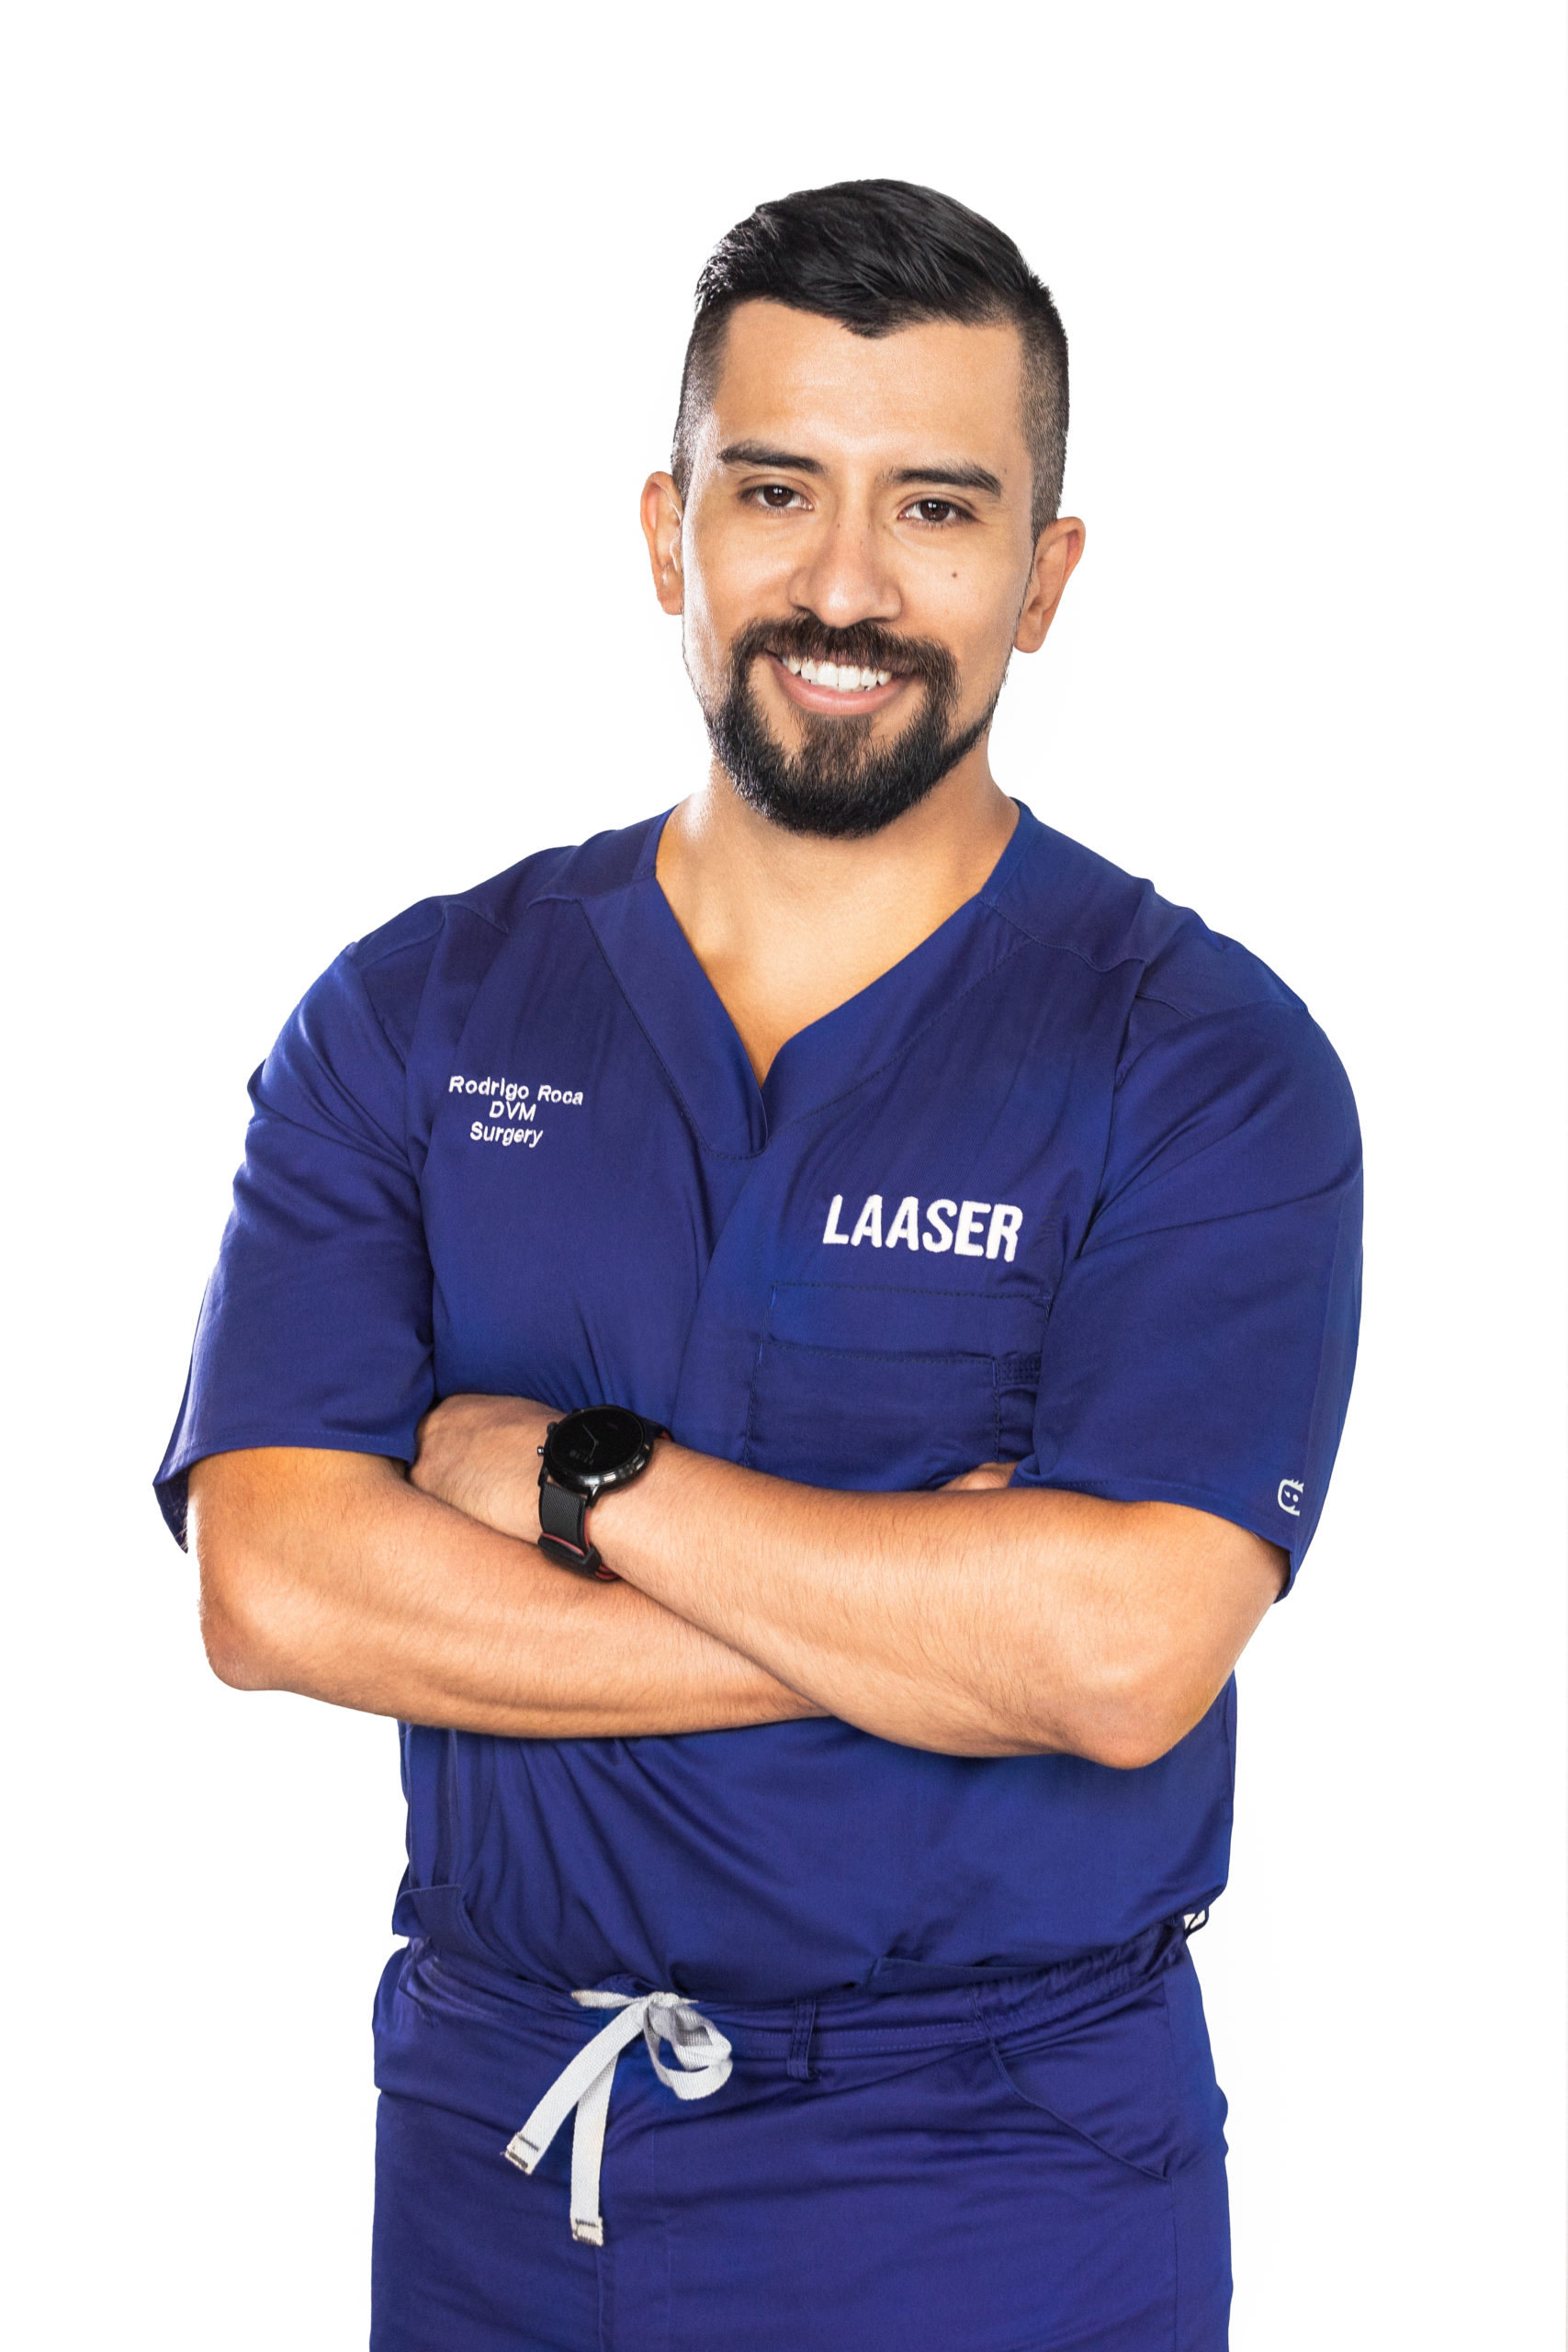 Dr. Rodrigo Roca, DVM - Limited to the Practice of Surgery